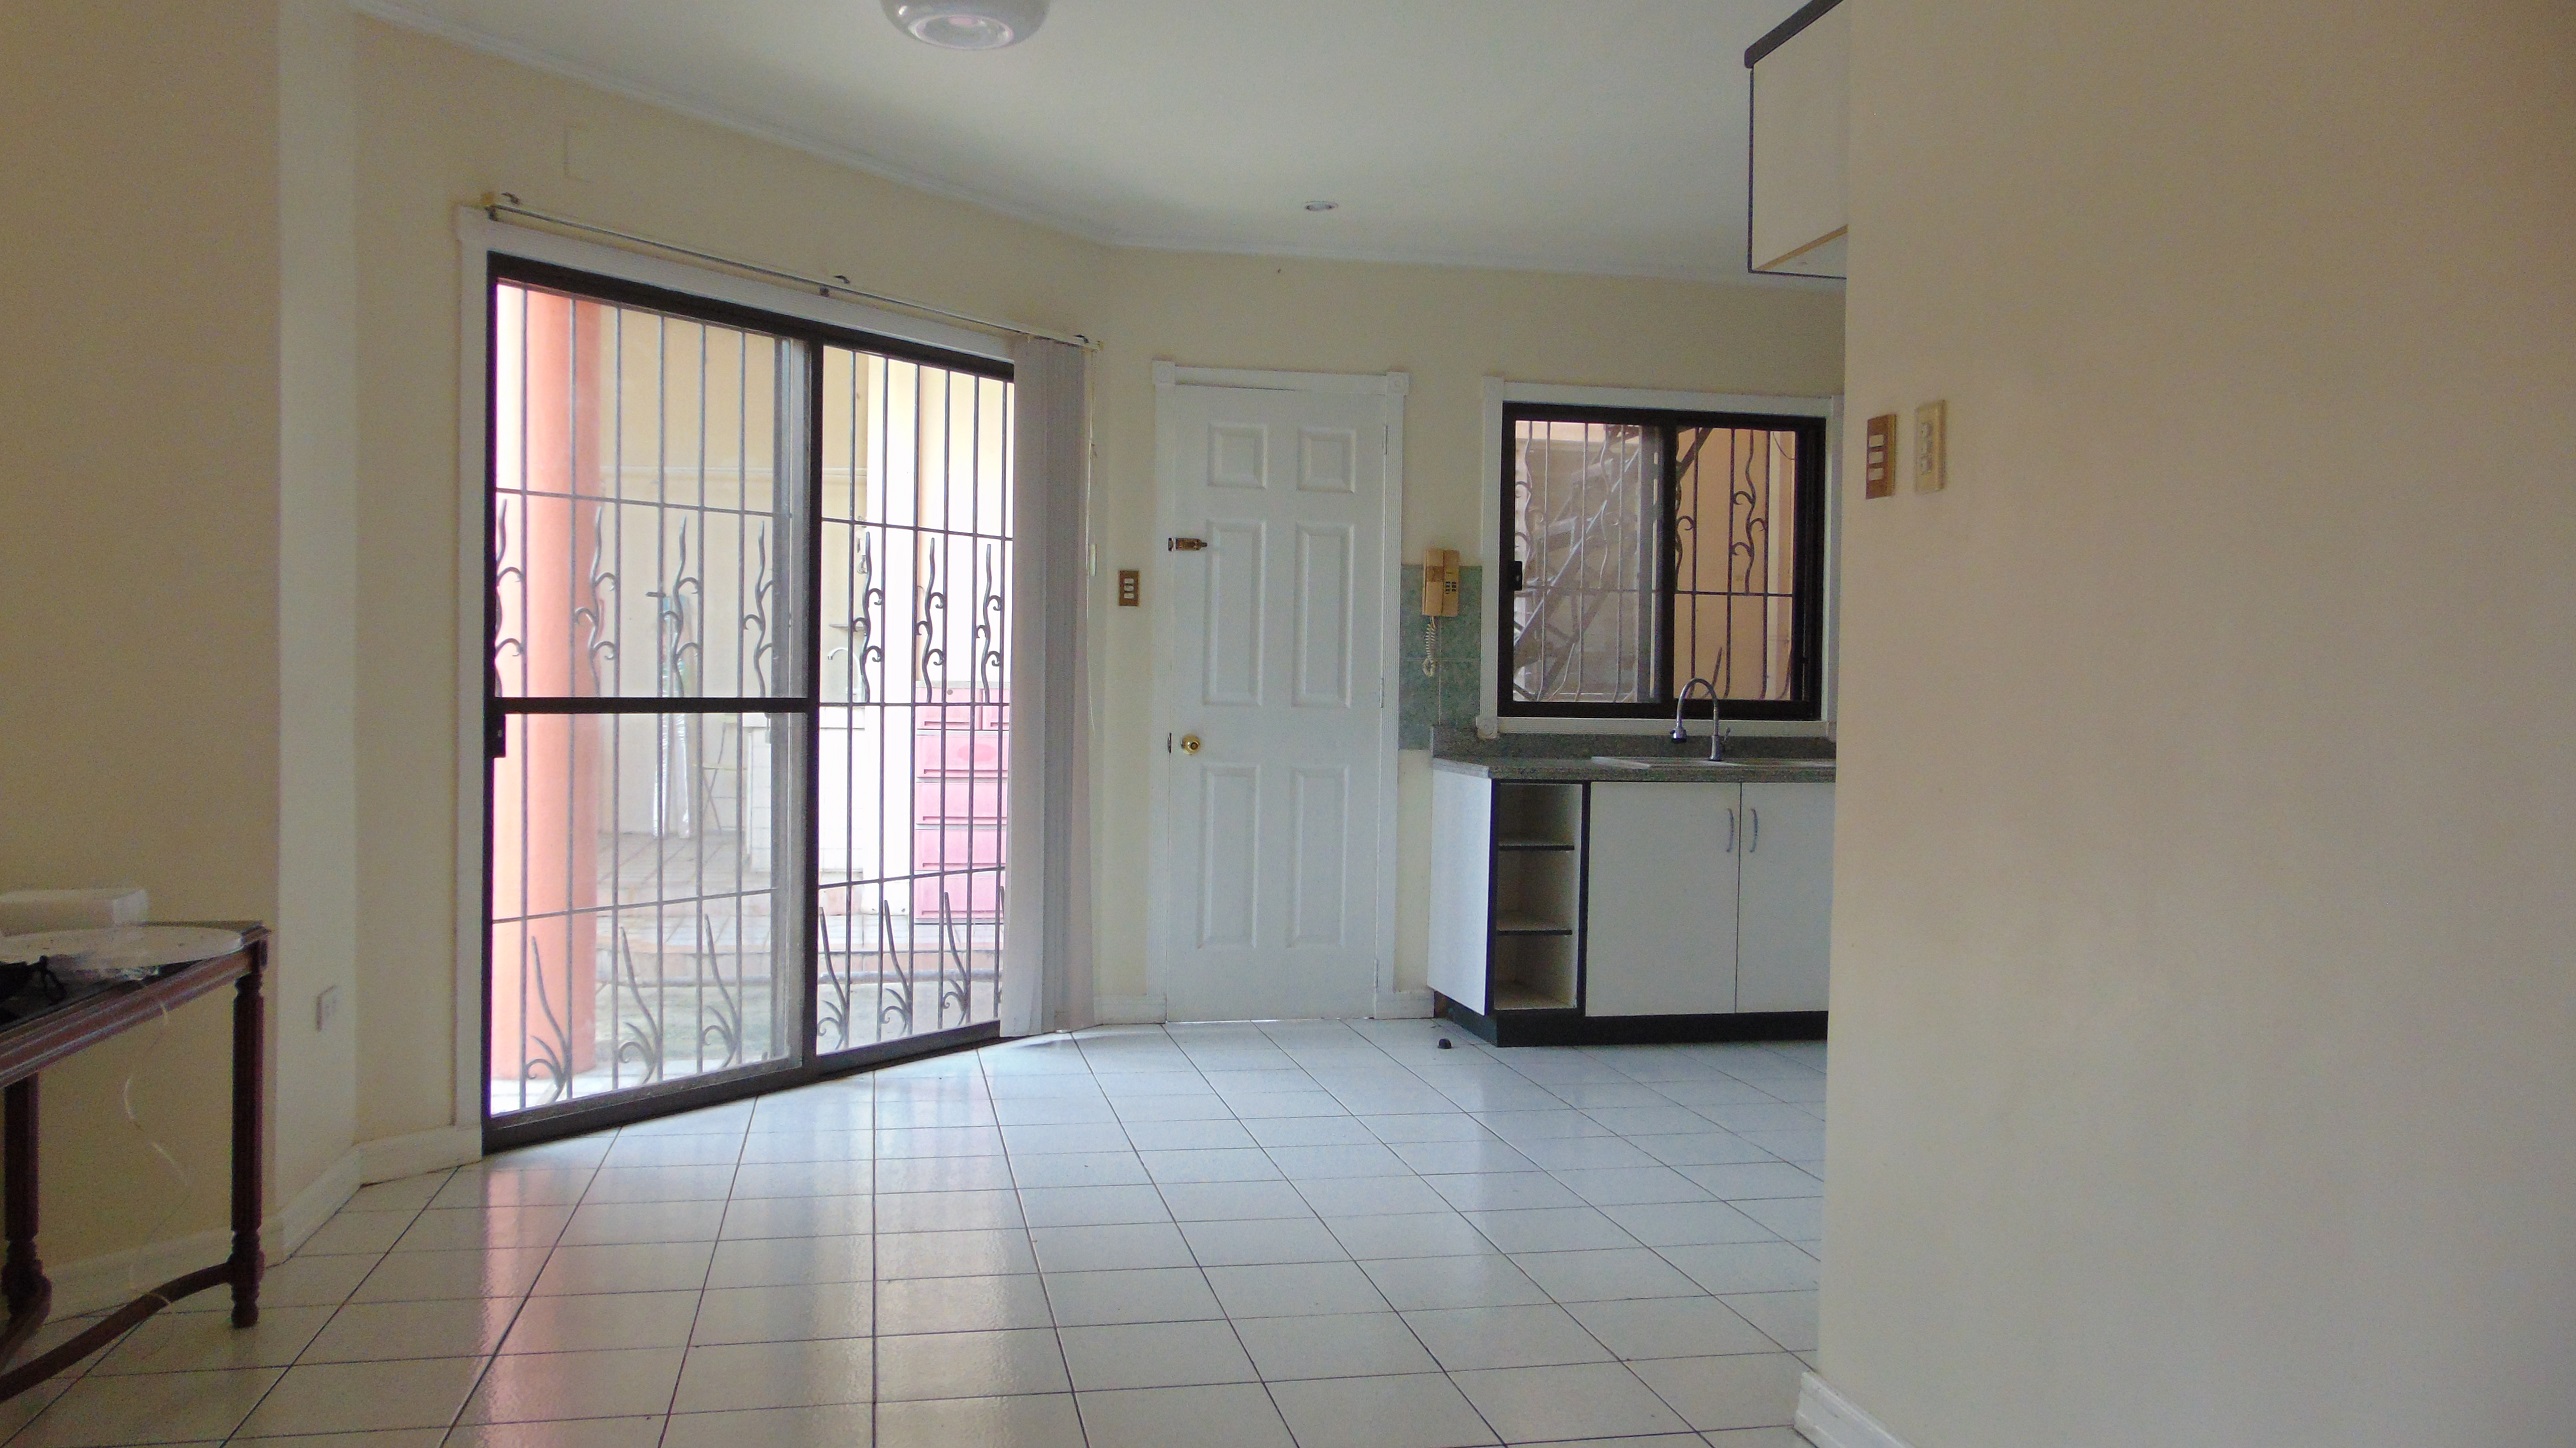 4-bedrooms-semi-furnished-house-located-in-banilad-cebu-city